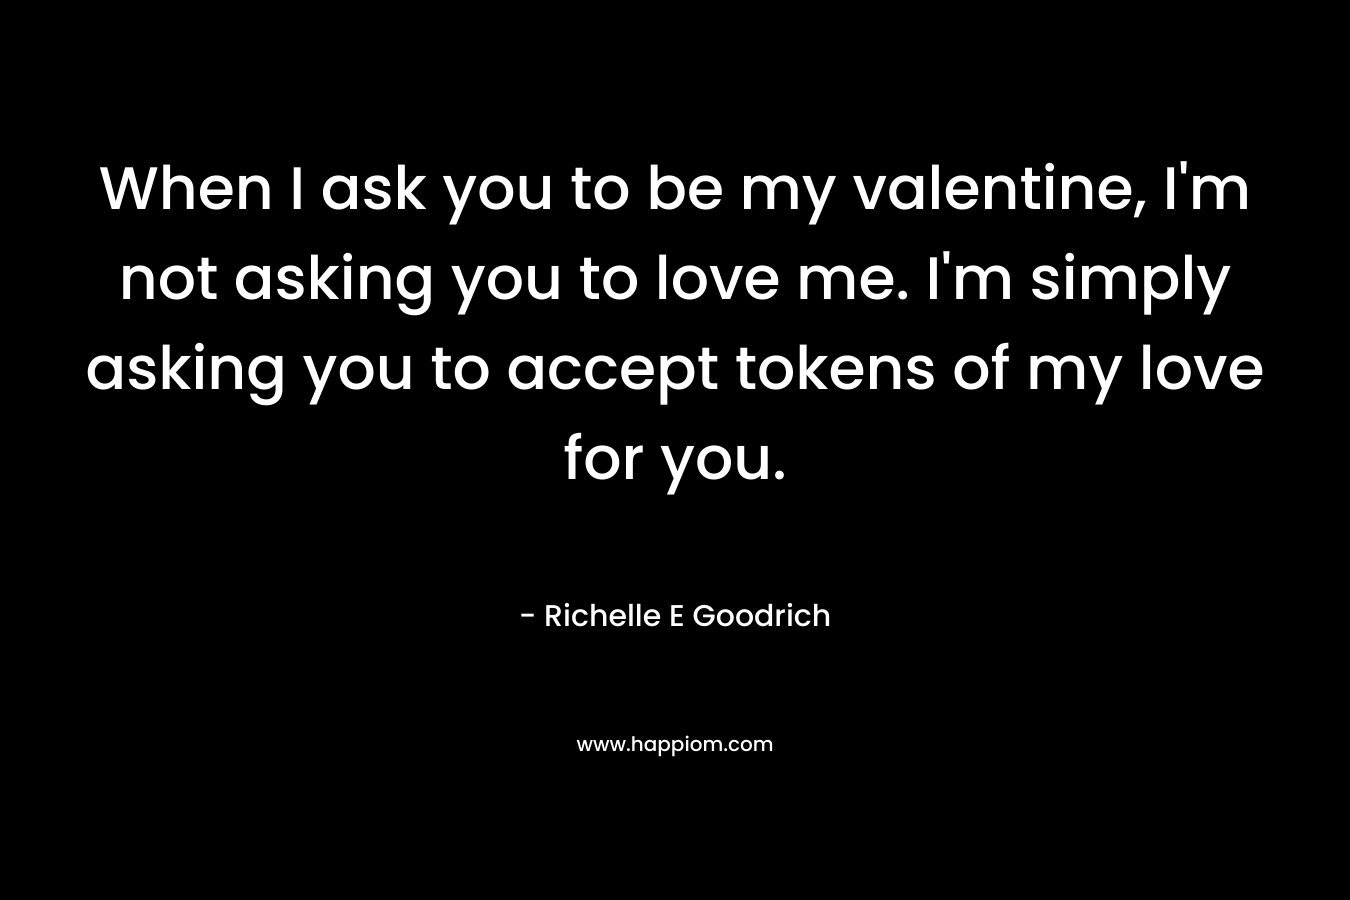 When I ask you to be my valentine, I'm not asking you to love me. I'm simply asking you to accept tokens of my love for you.